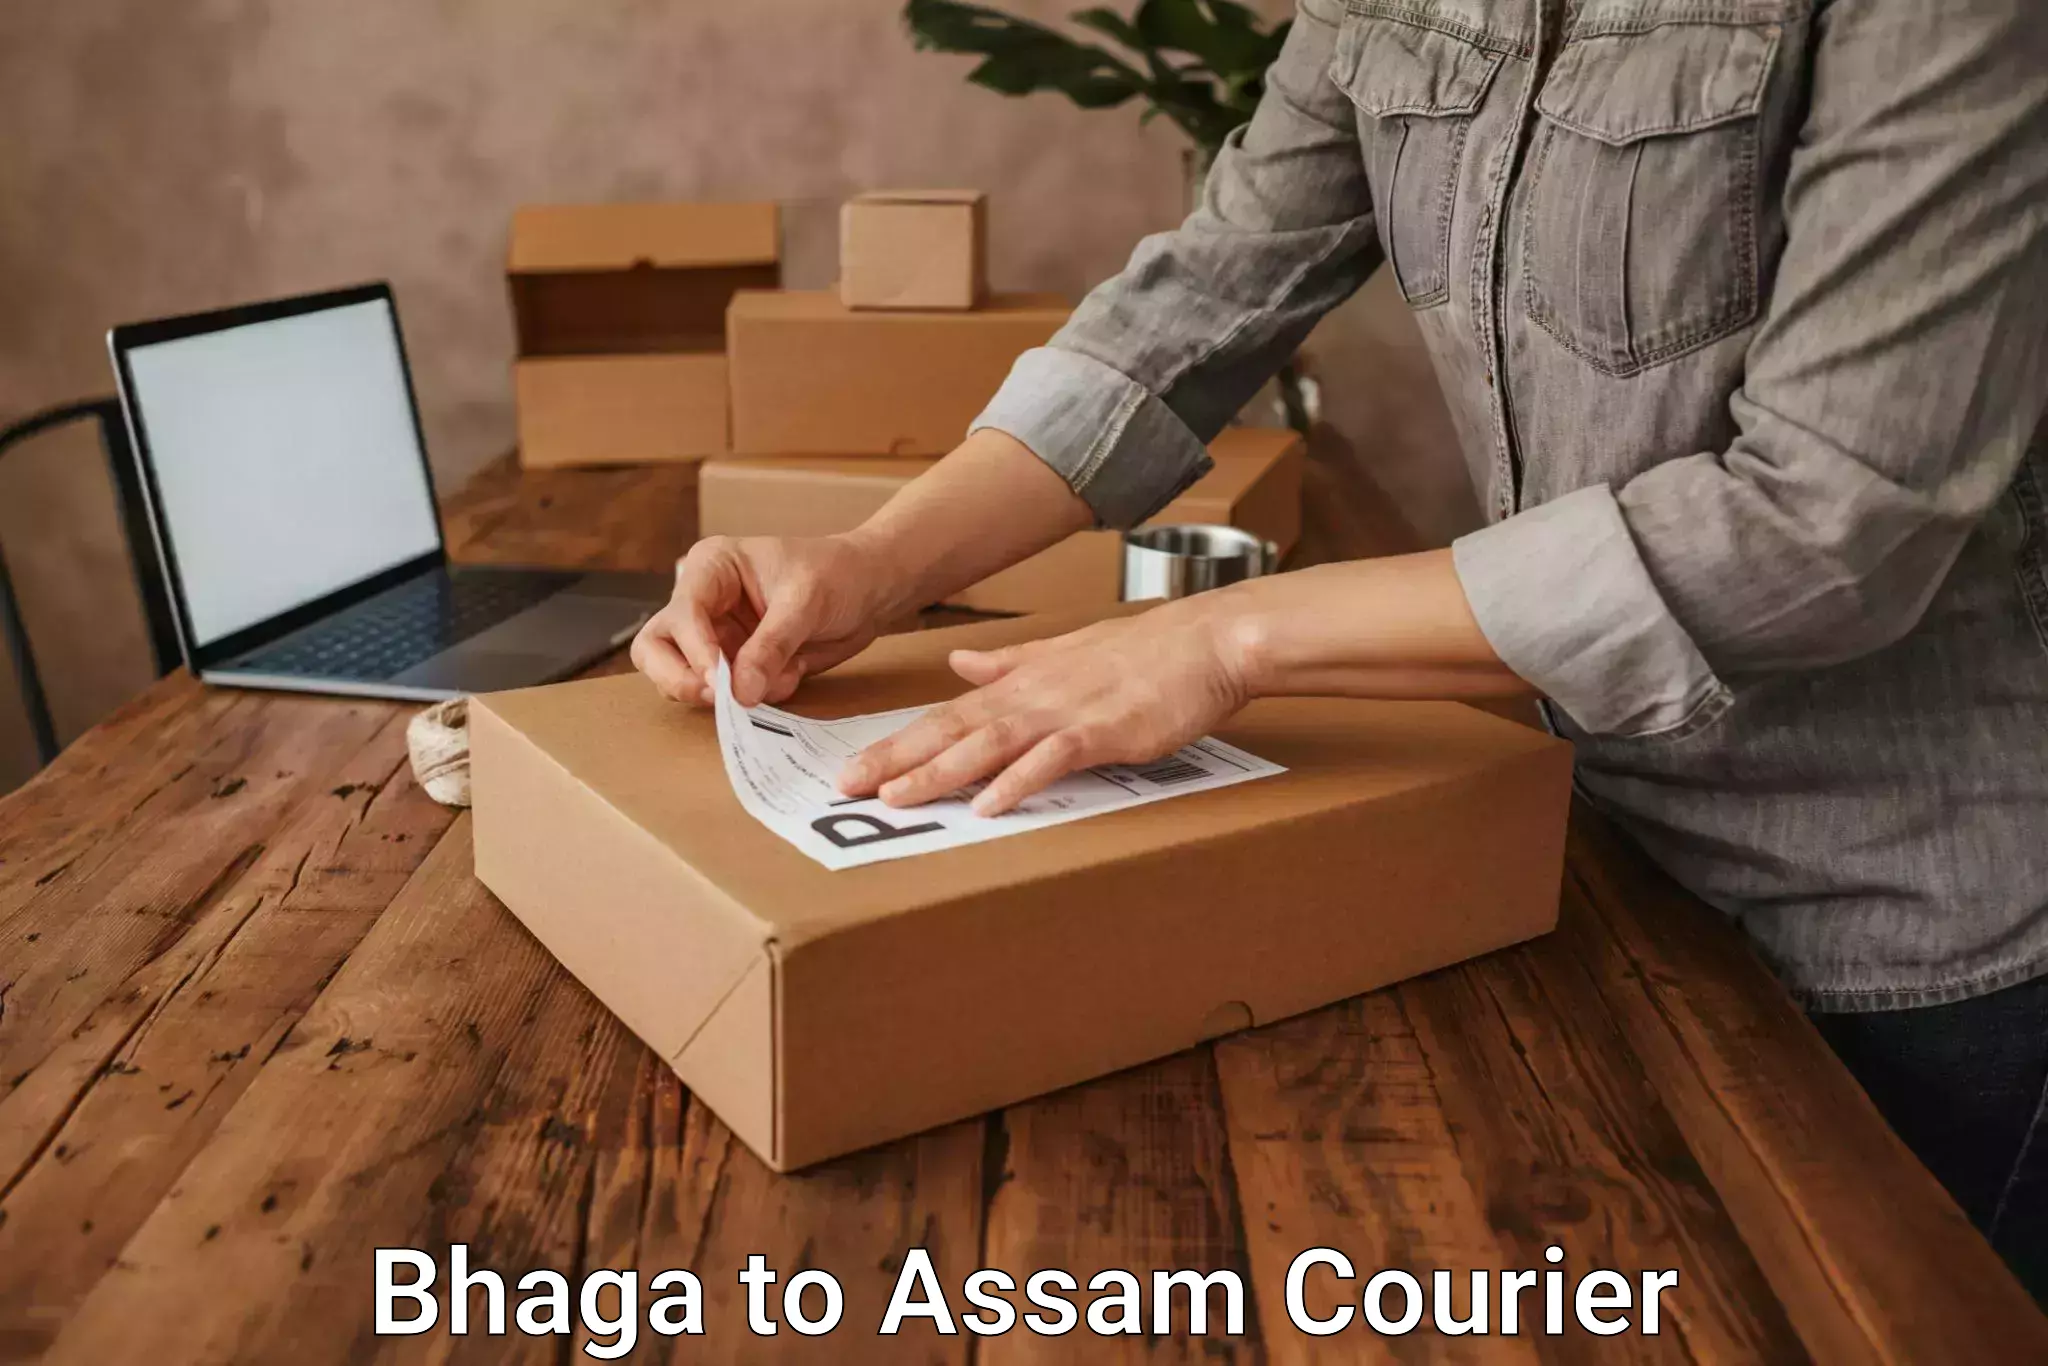 Express delivery network Bhaga to Assam